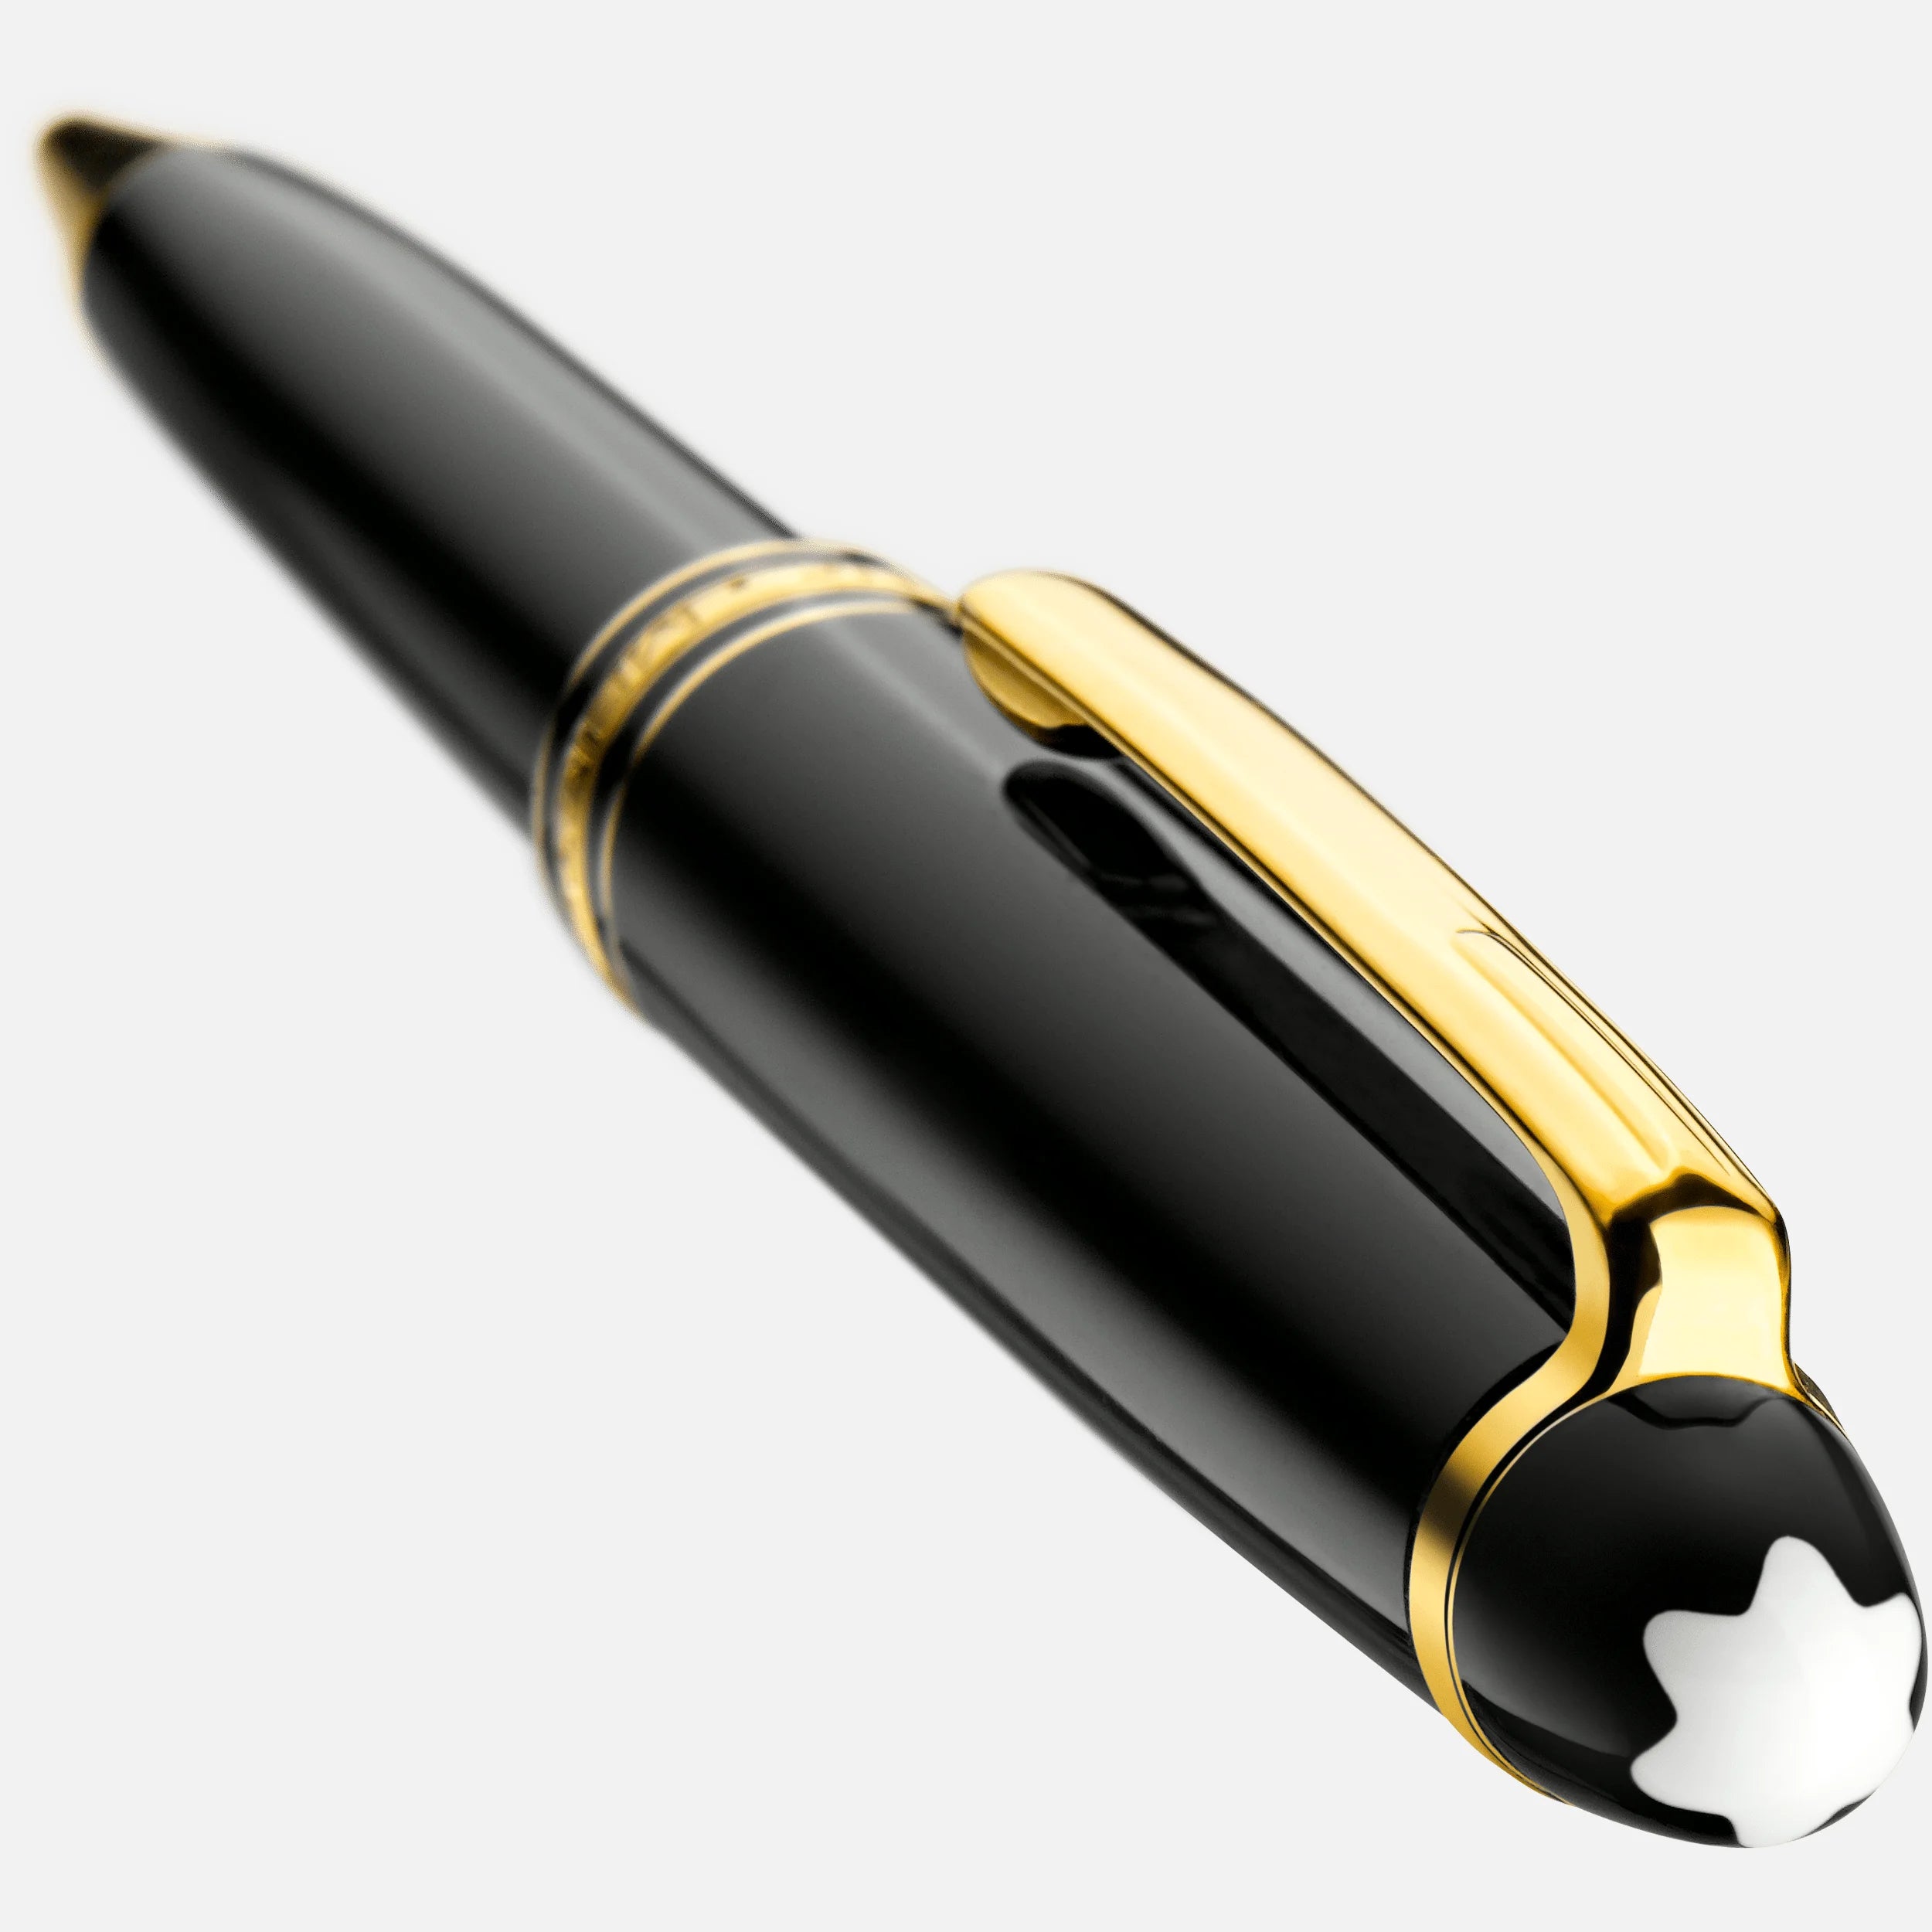 MONTBLANC | Penna a sfera Meisterstück Gold-Coated | MB132453